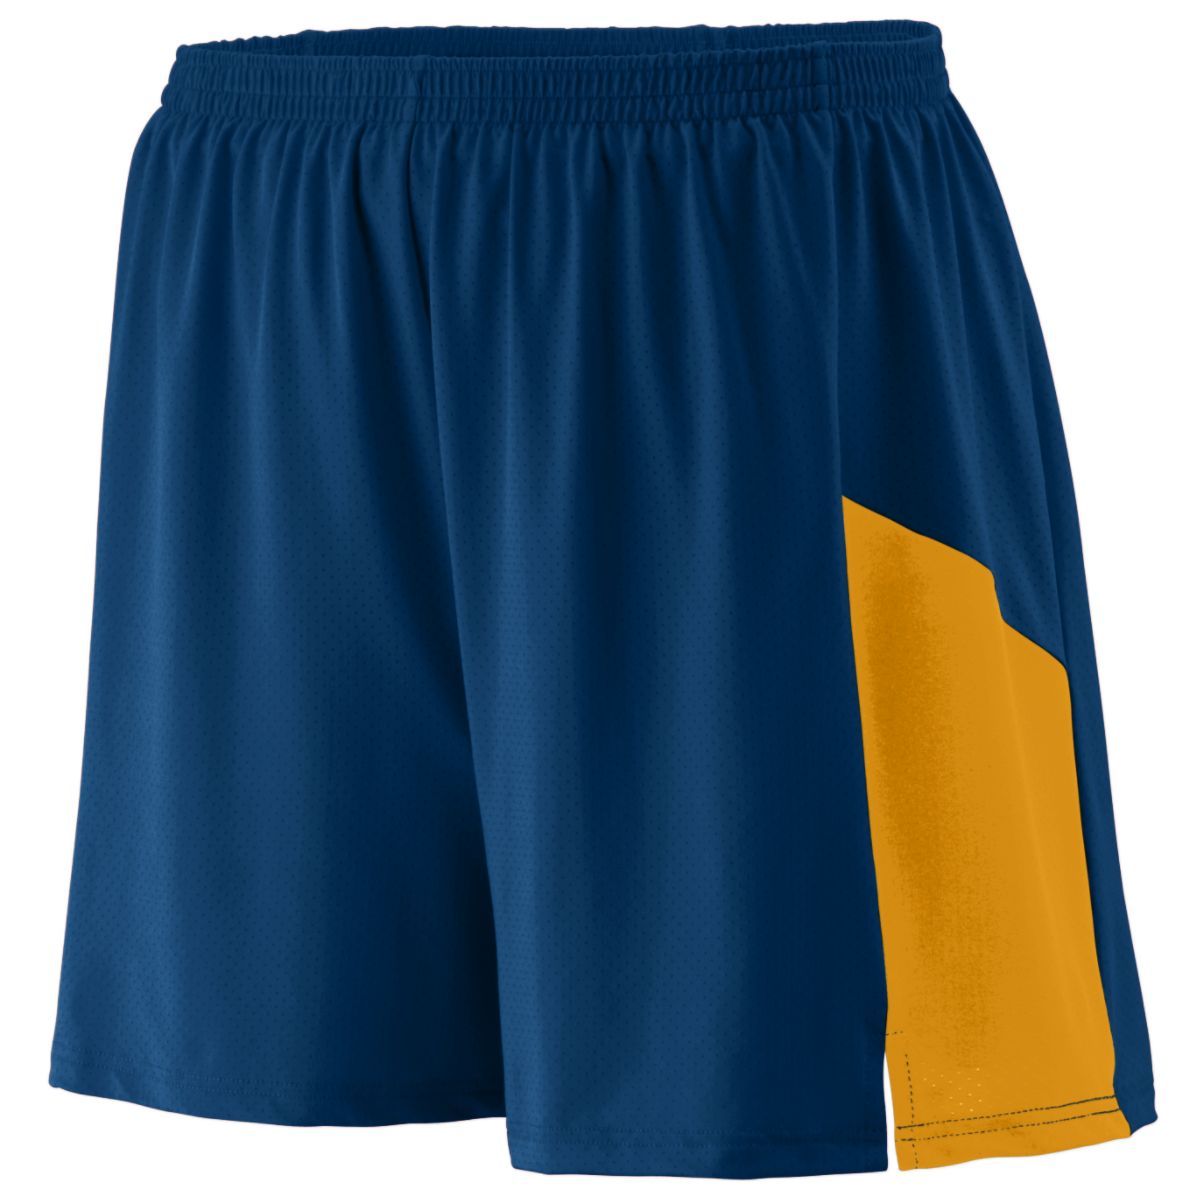 Augusta Sportswear Youth Sprint Shorts in Navy/Gold  -Part of the Youth, Youth-Shorts, Augusta-Products, Track-Field product lines at KanaleyCreations.com